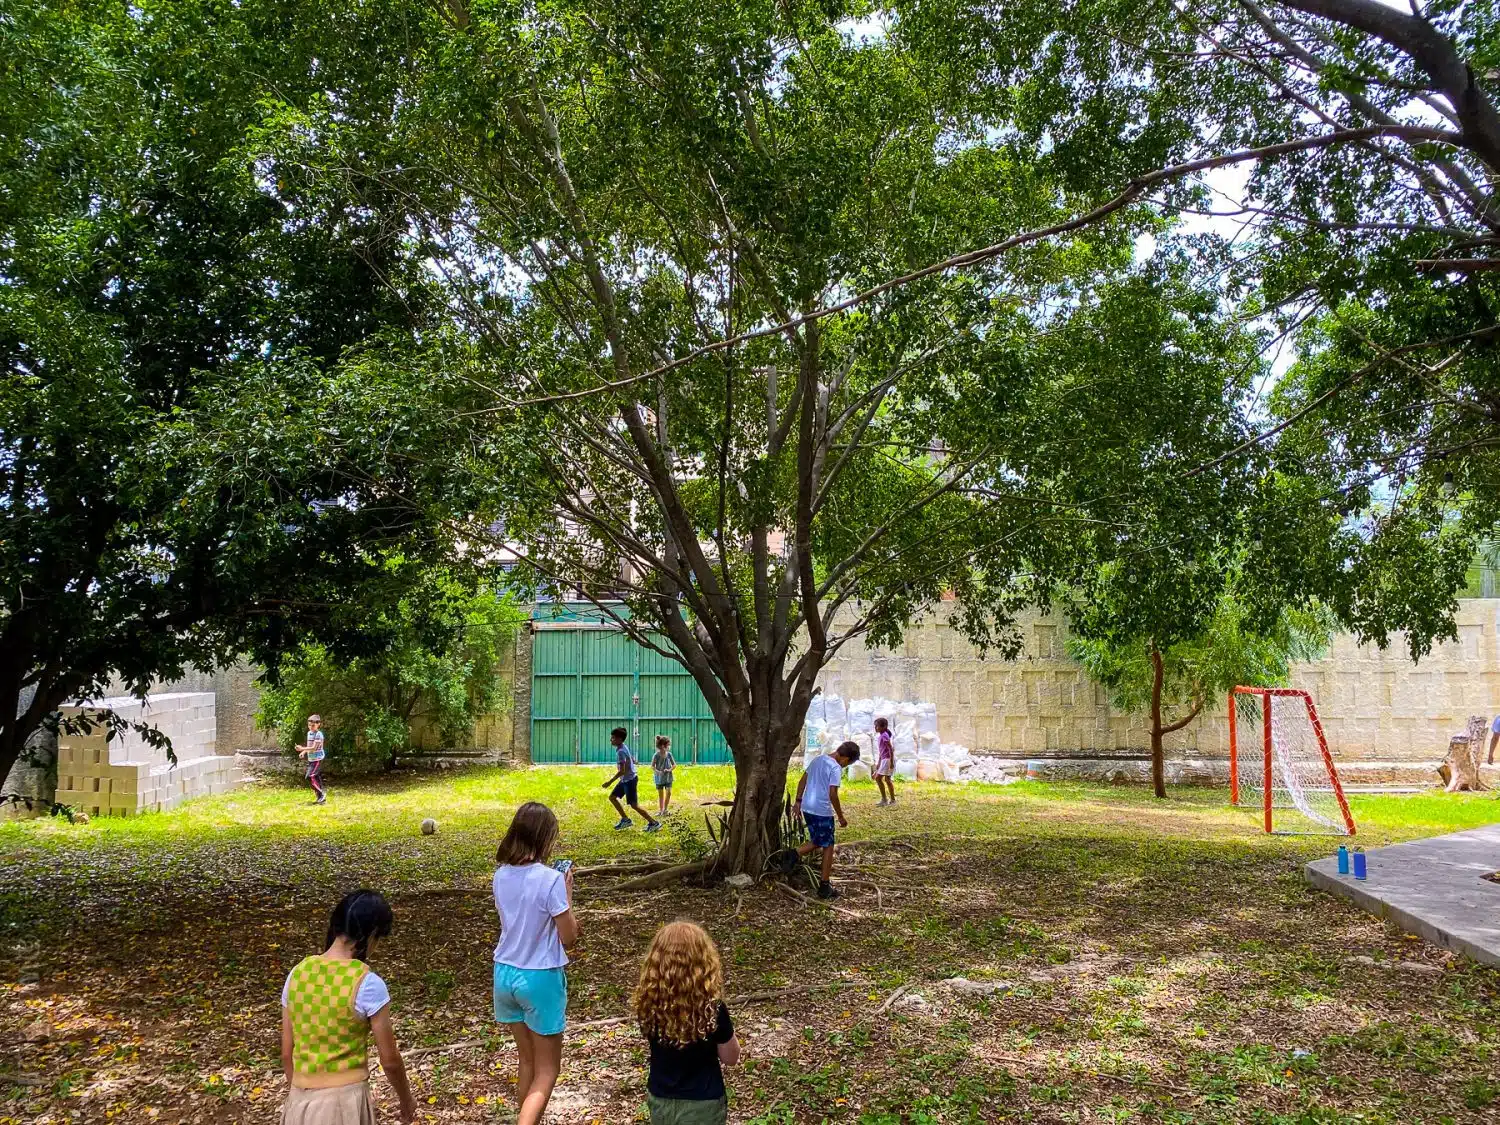 The yard at Habla, with happy Spanish-learning kids playing.